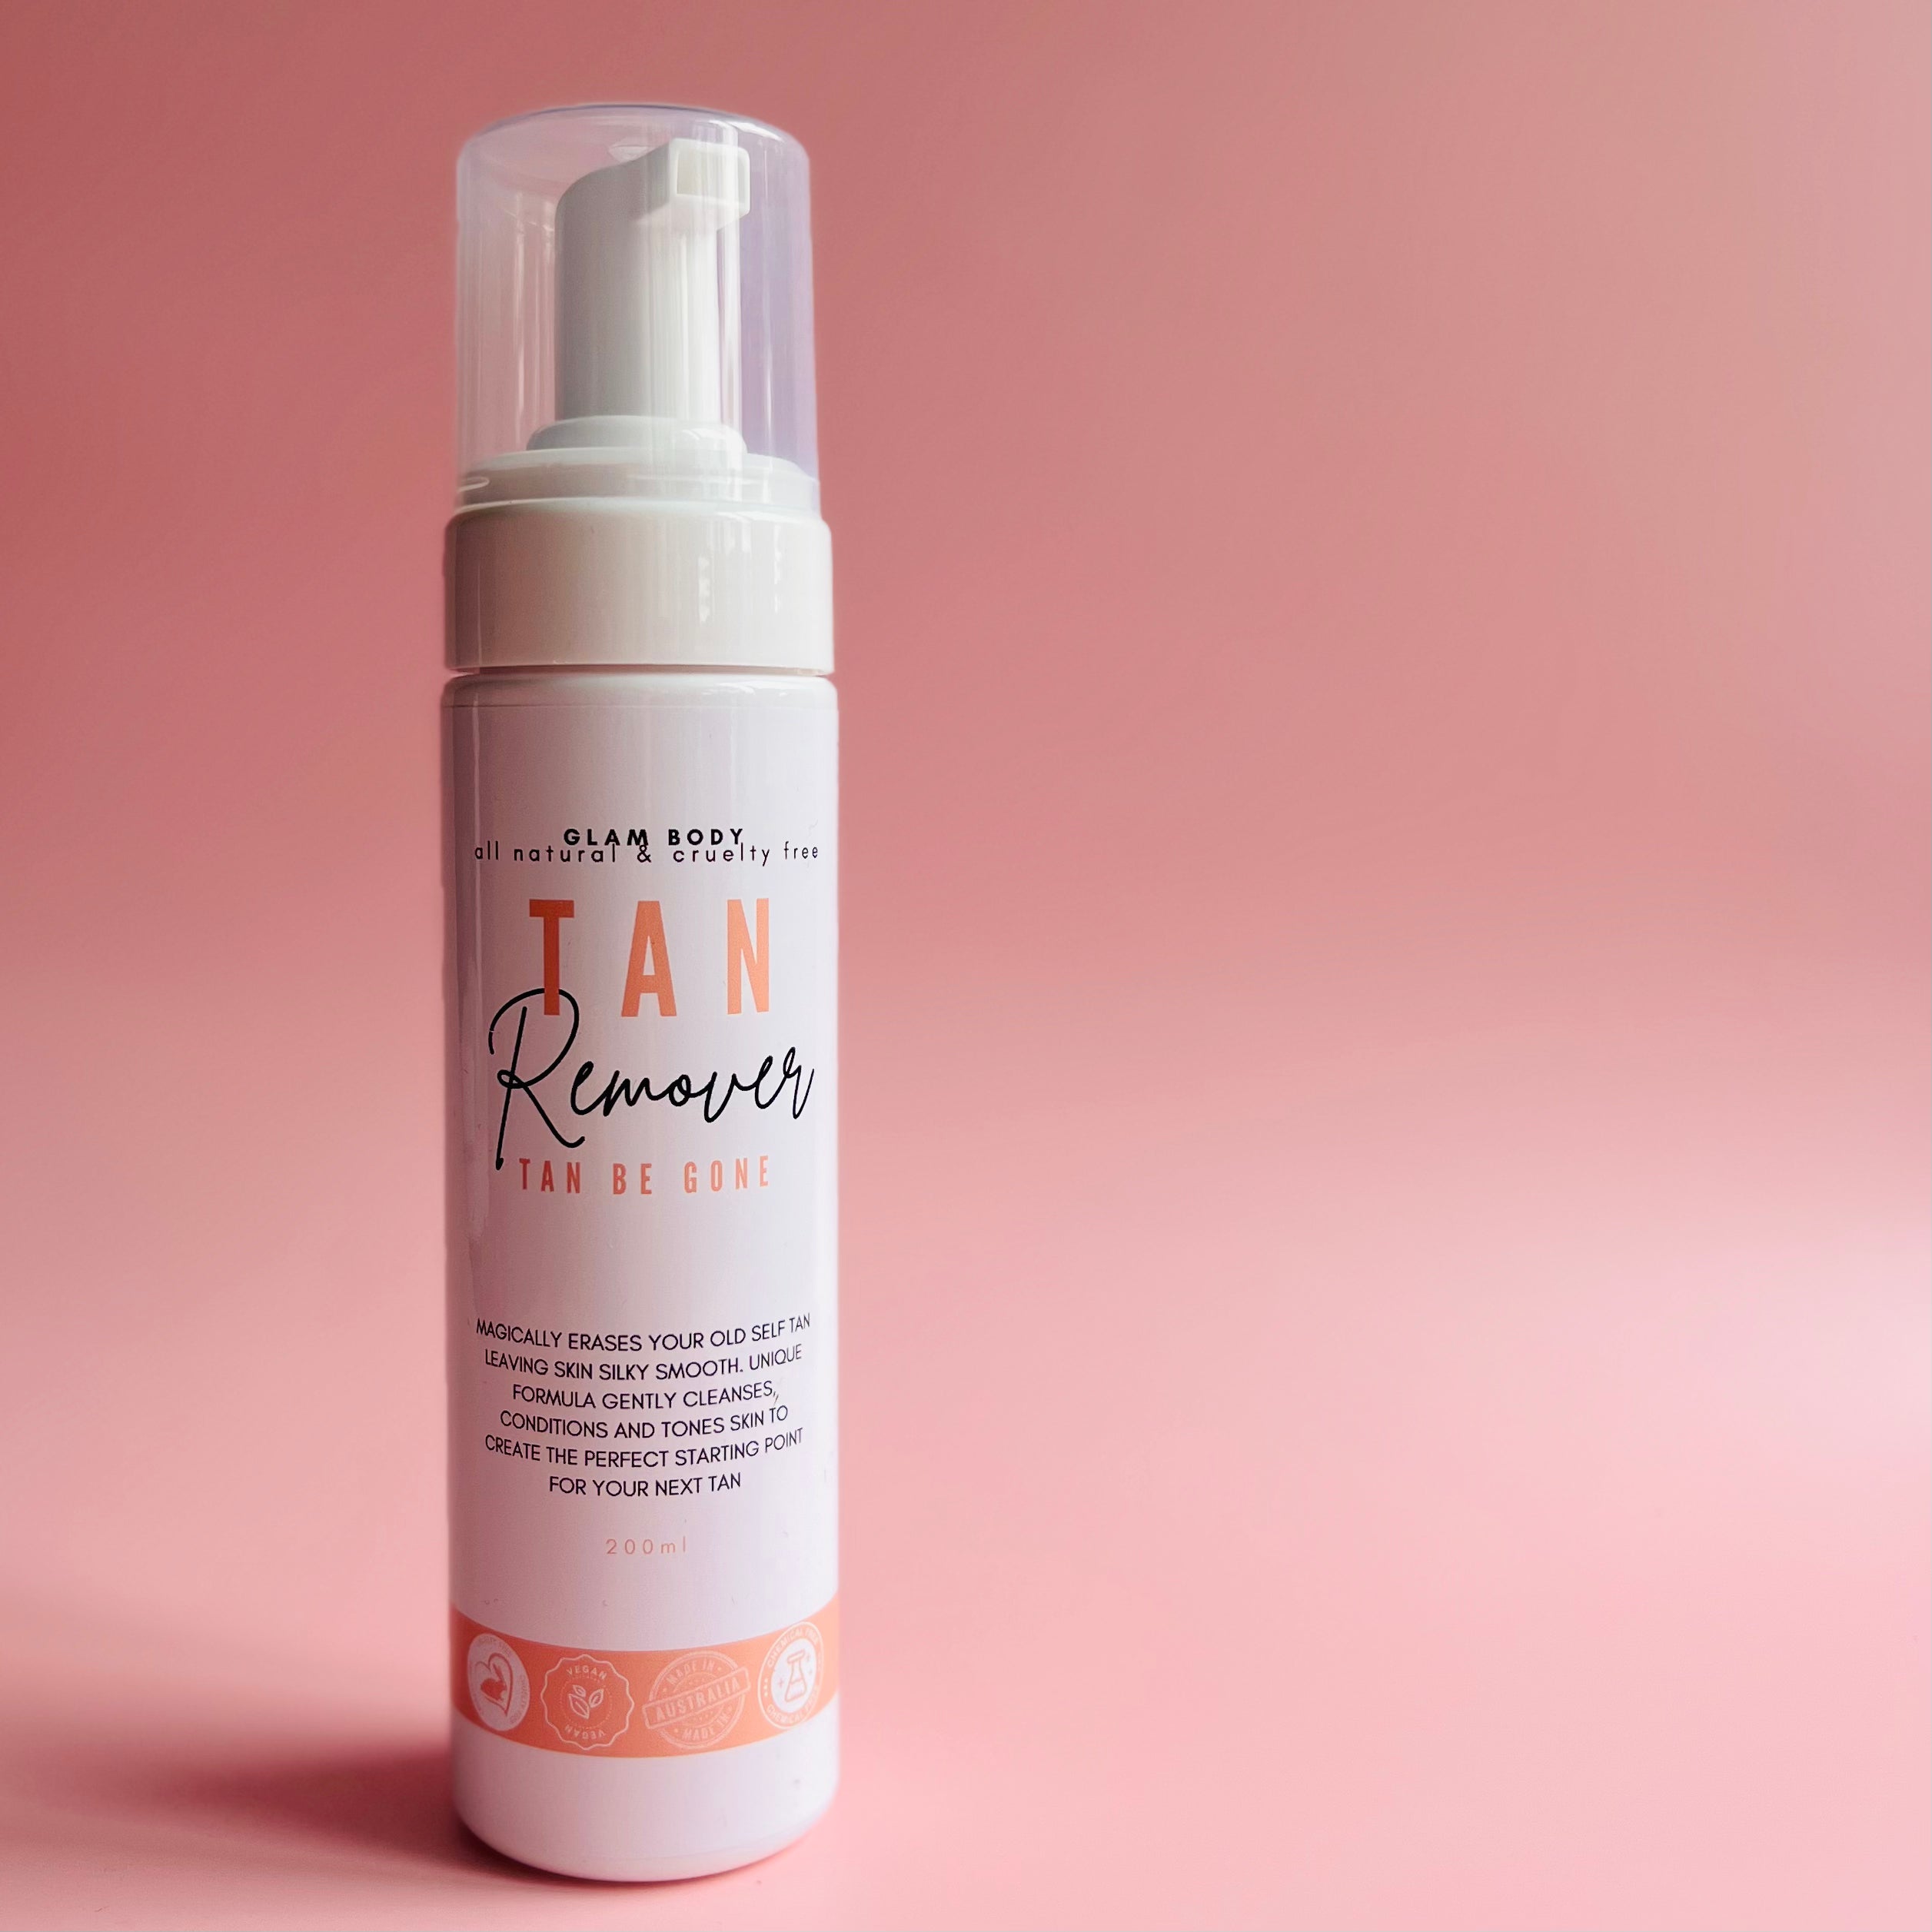 TAN REMOVER MOUSSE - Glam Body